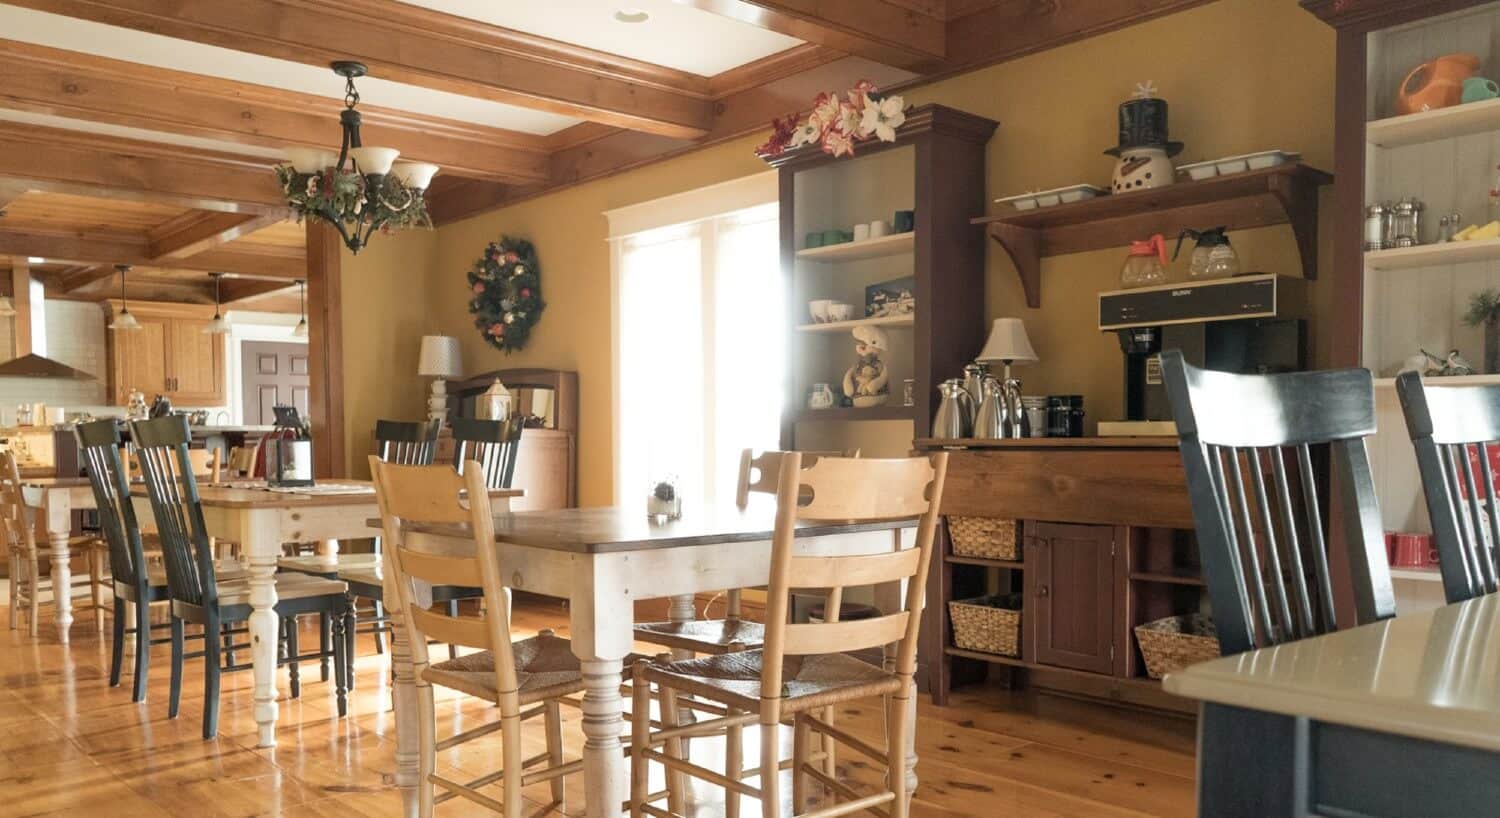 Elegant and rustic dining area off of a kitchen with coffee hutch and several tables with chairs